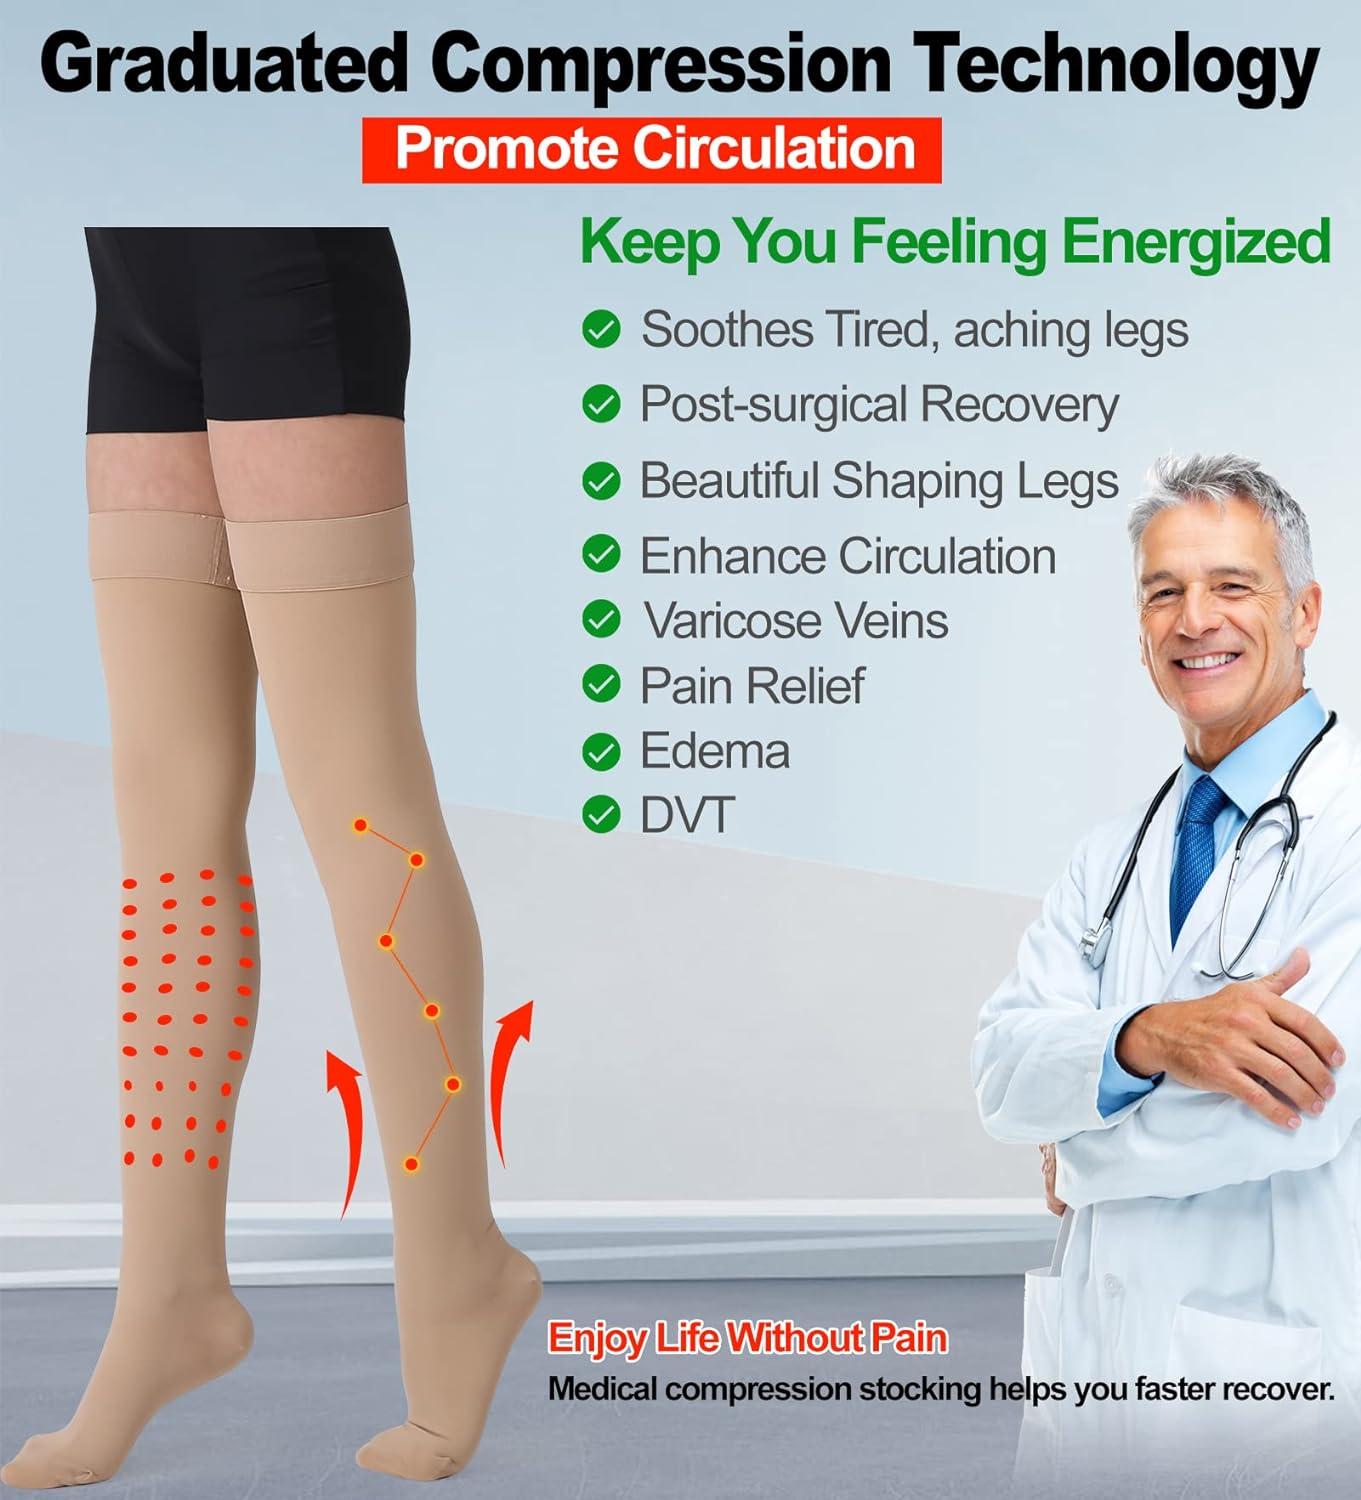 Reducing DVT and leg ulcers through personalized compression socks